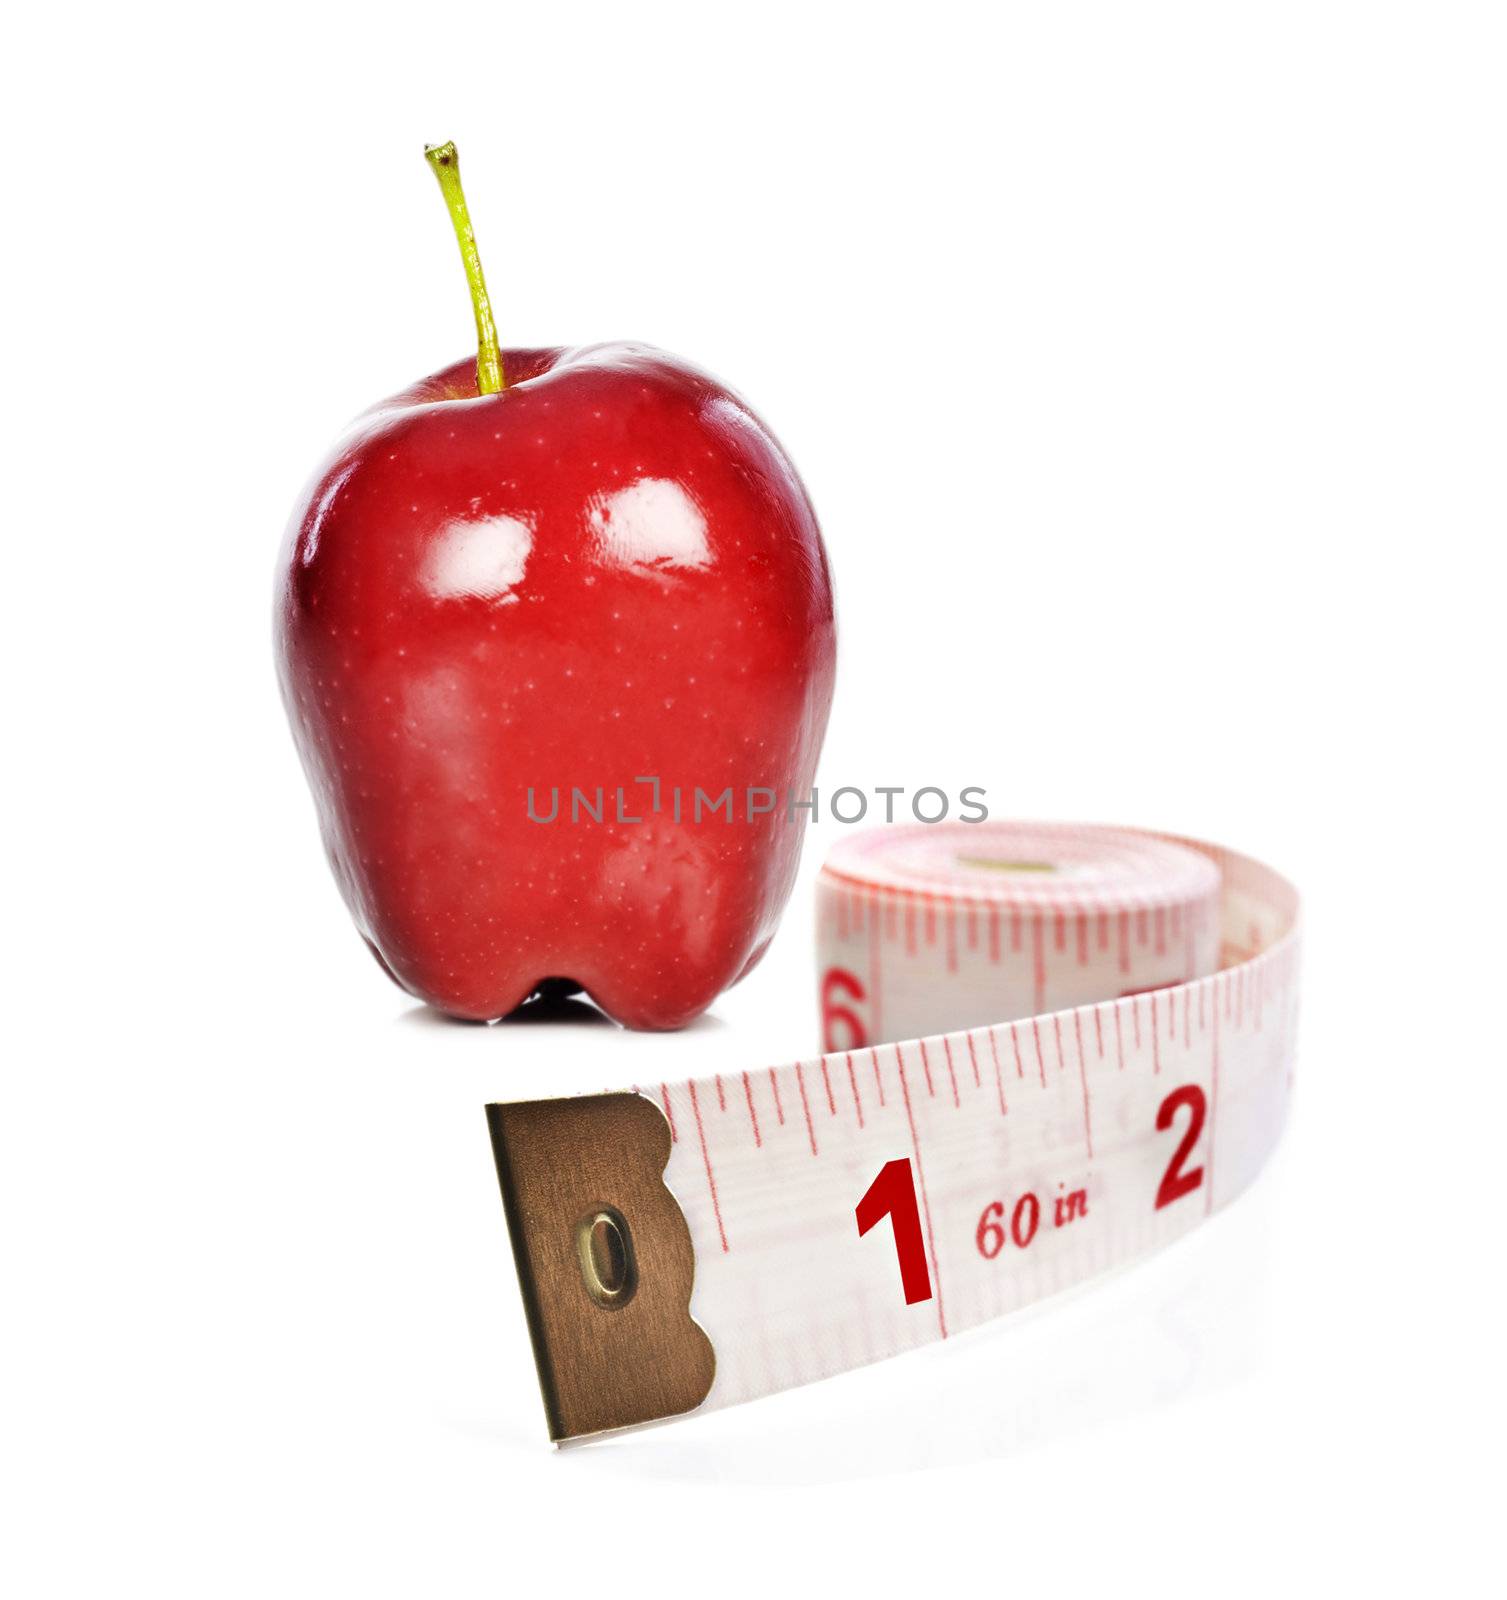 Healthy lifestyle - fresh healthy apple and tape measure on white by tish1